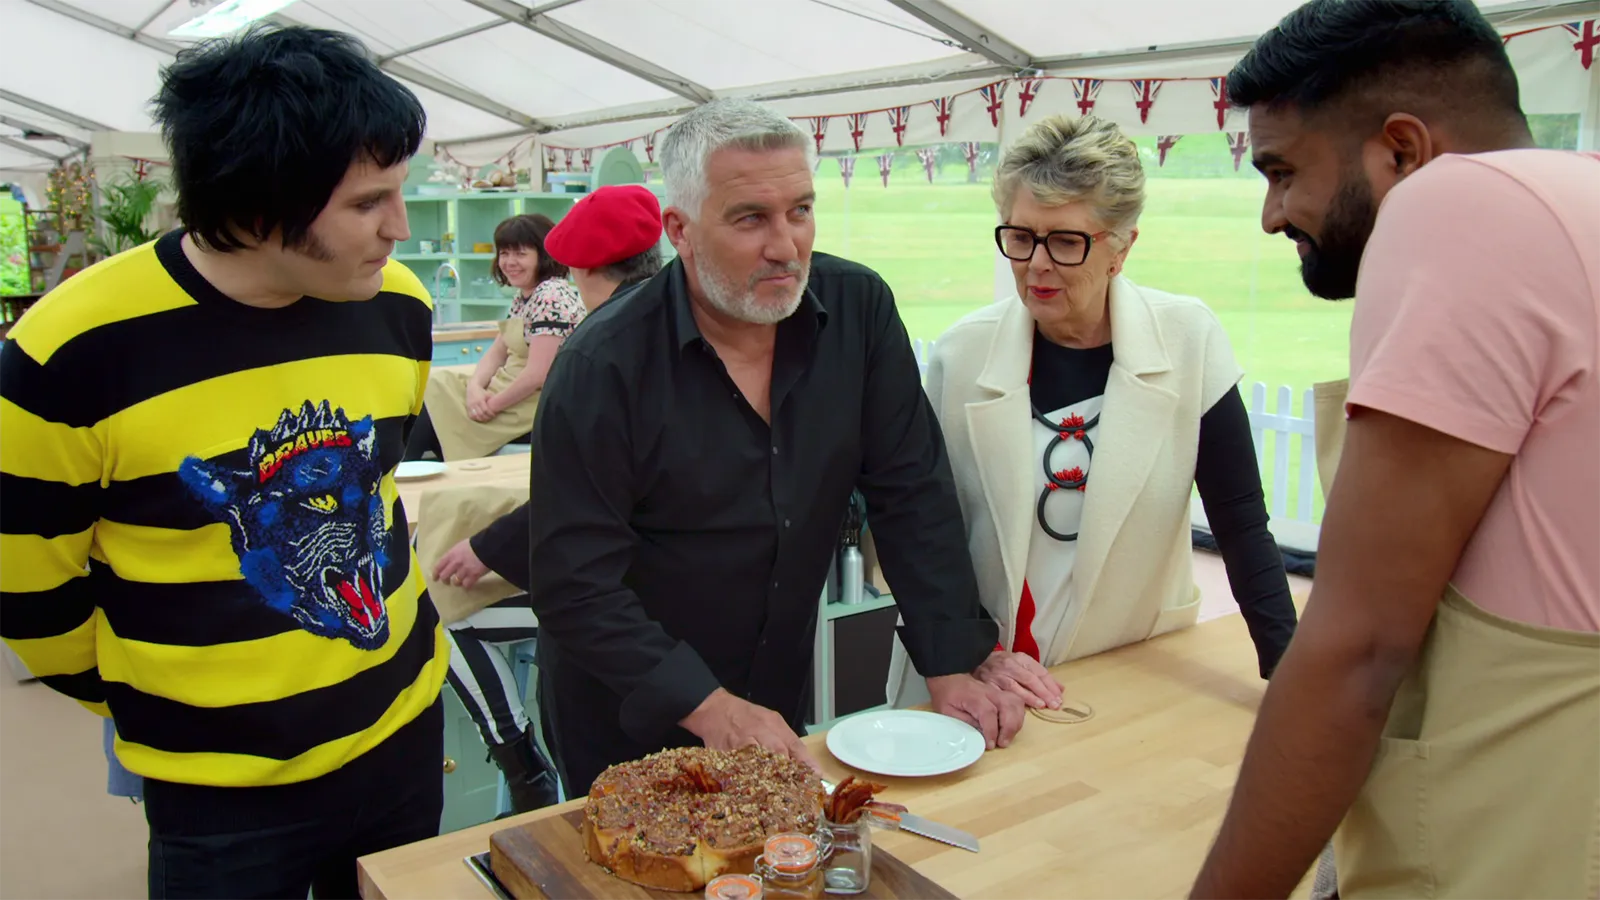 The Great British Bake-Off Season 13 Episode 7 Release Date